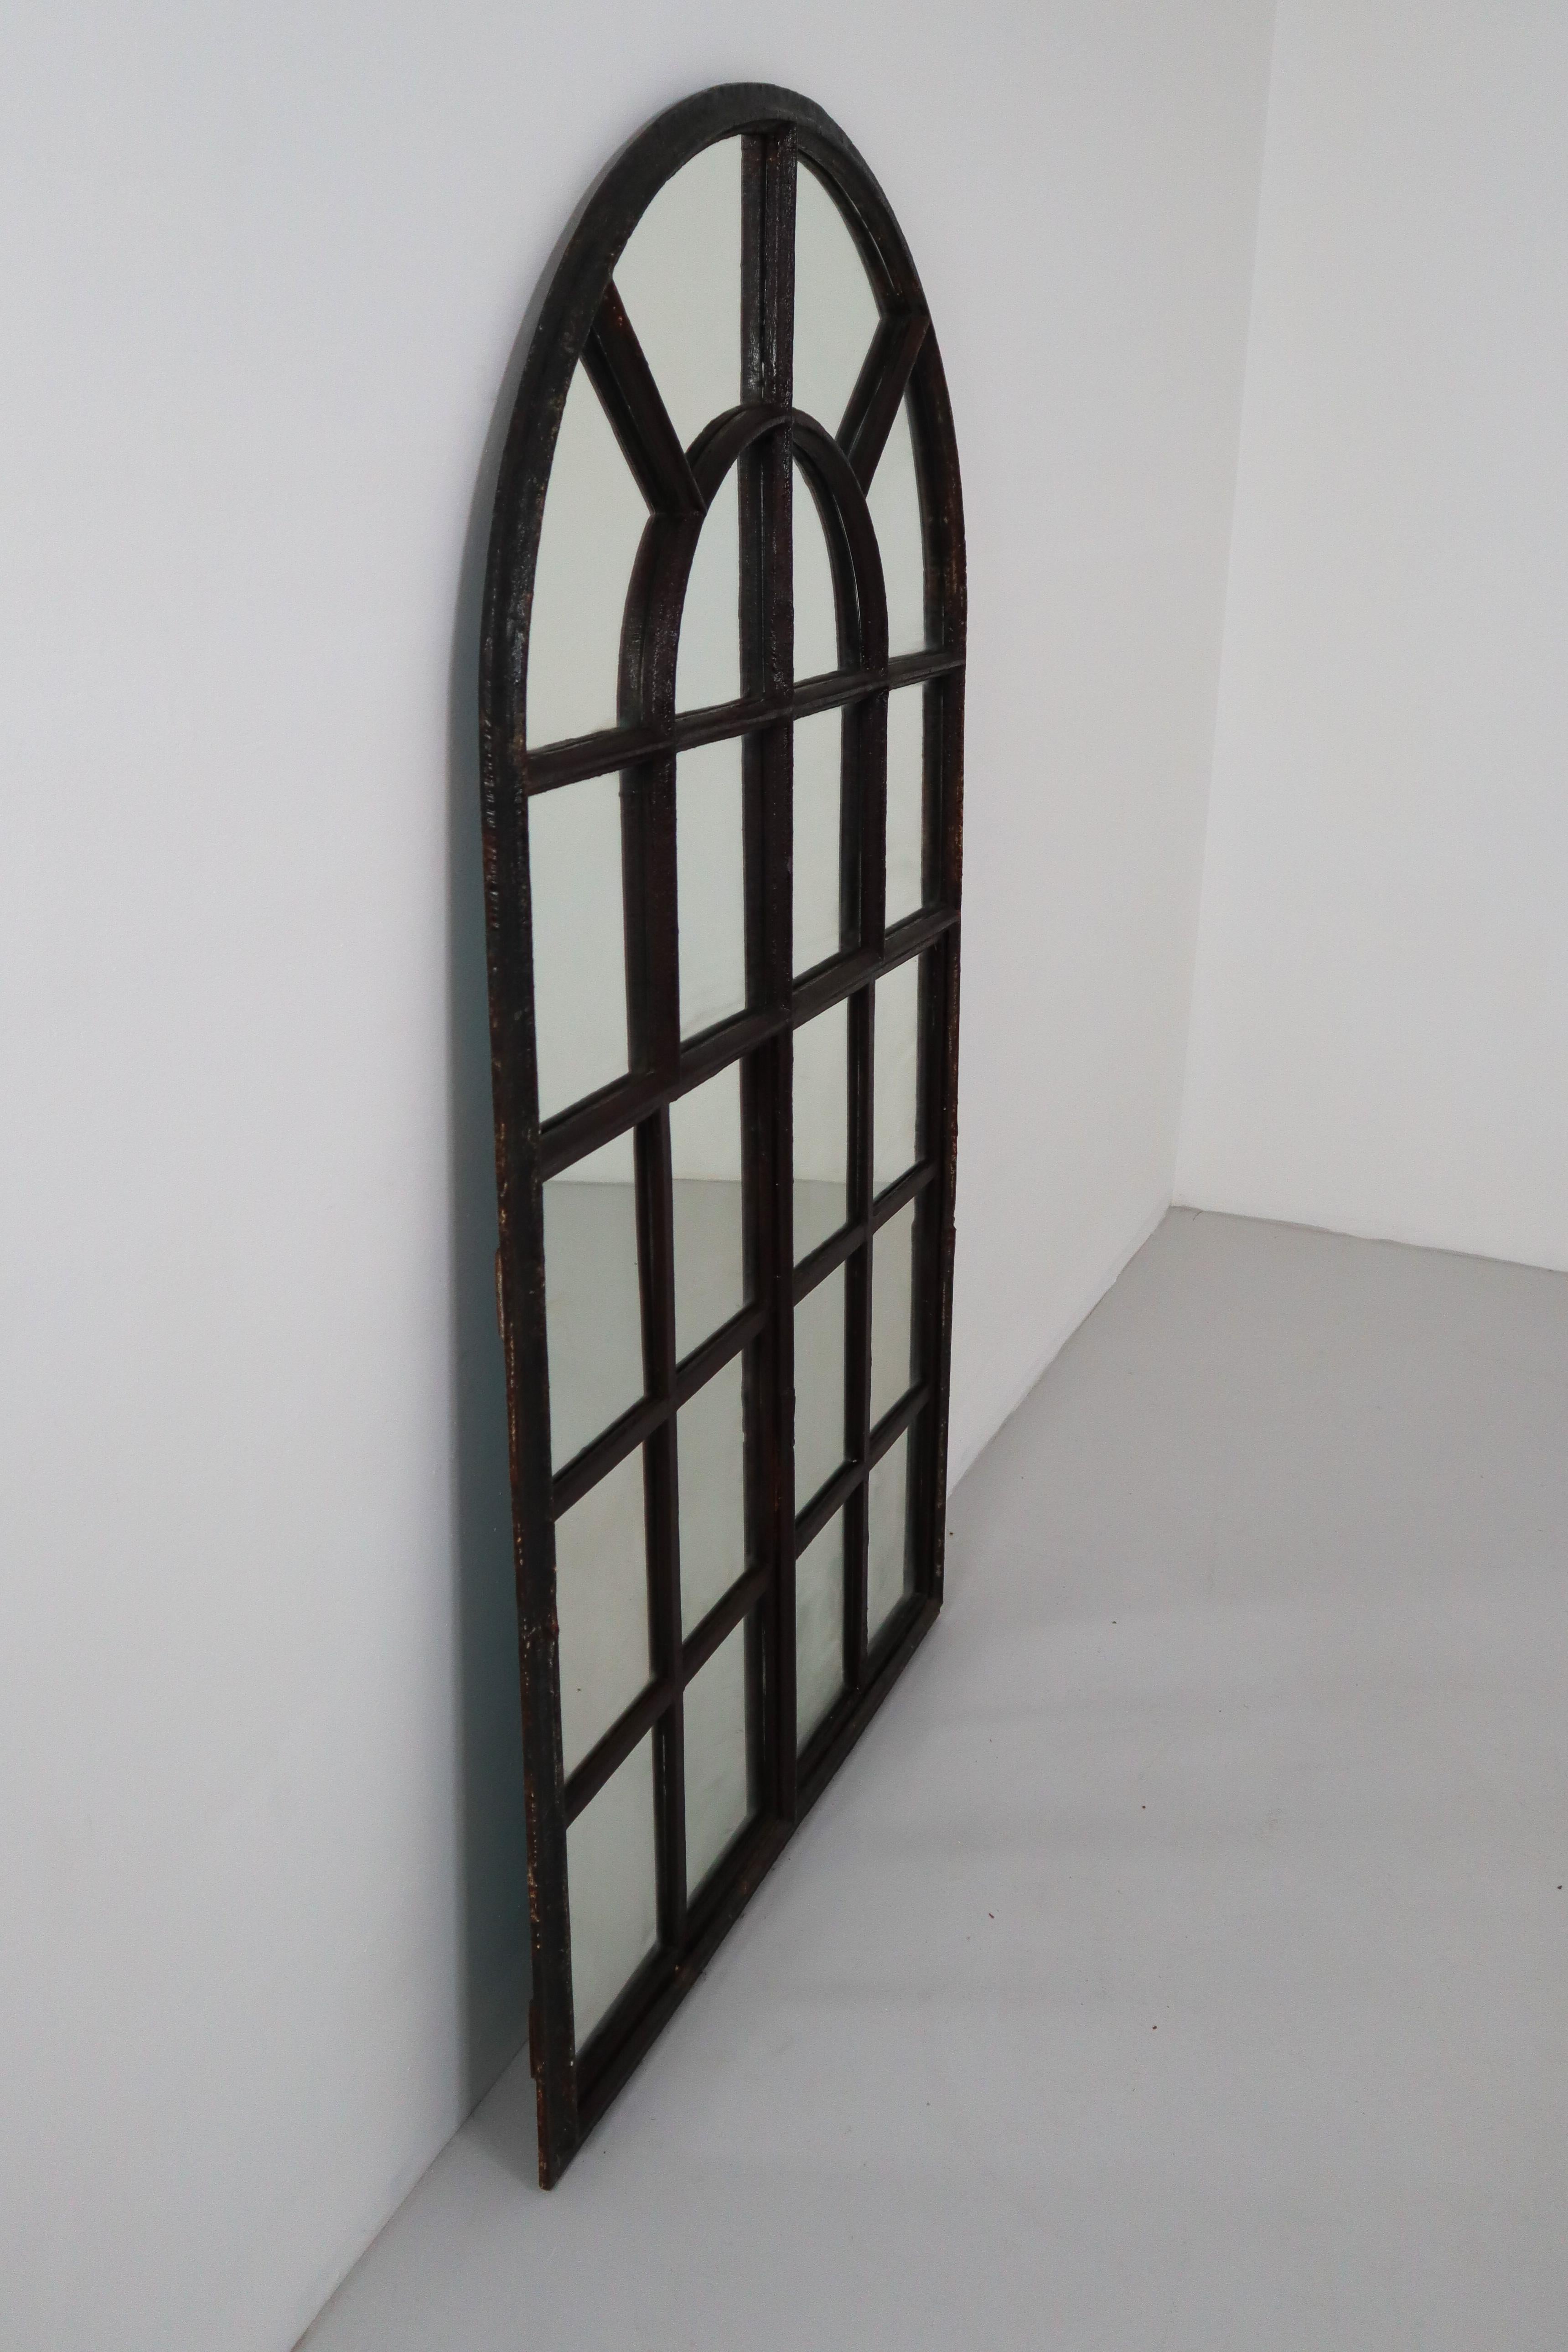 French Provincial Large Early Cast Iron Arched Industrial Window with Mirror, France, 1800s